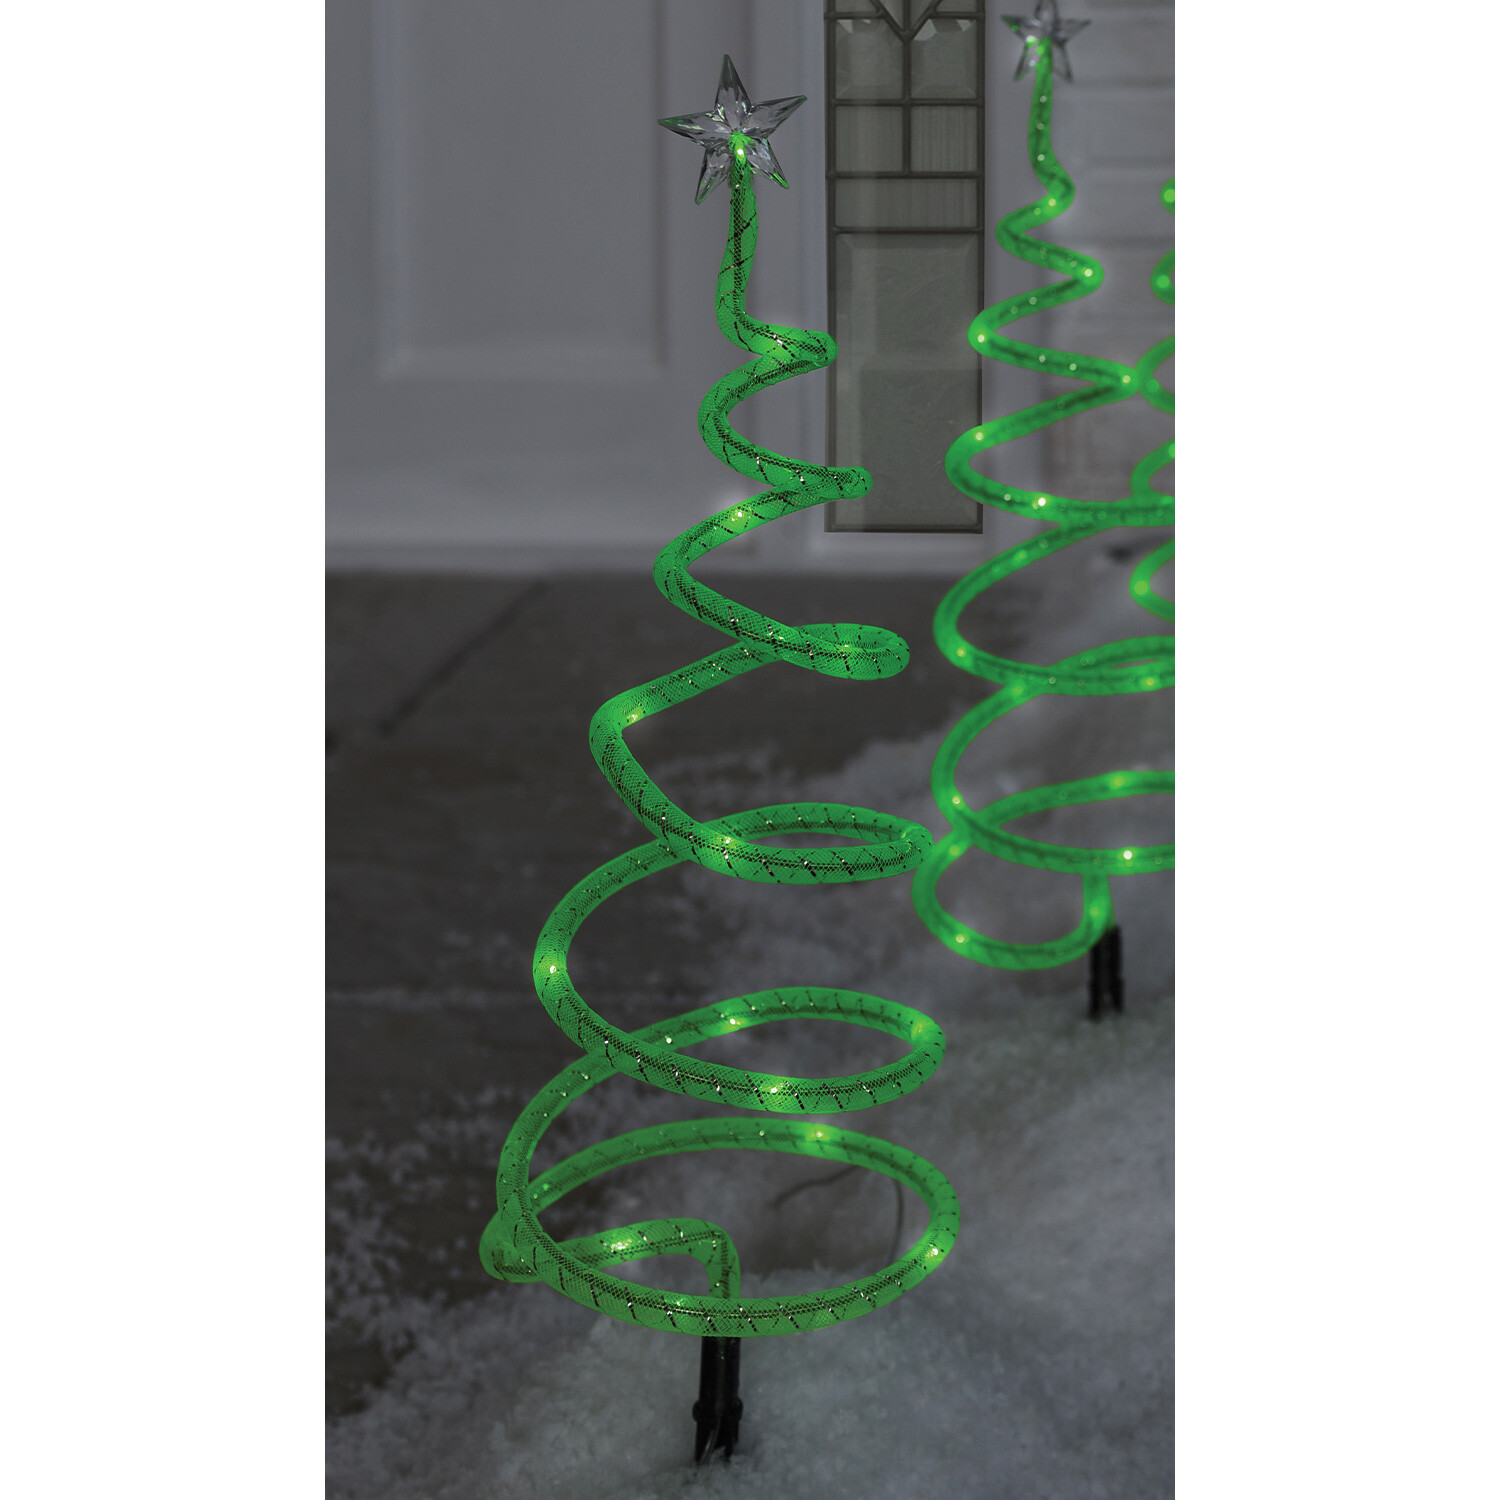 Set of 4 Spiral Tree Stakes - Green Image 2